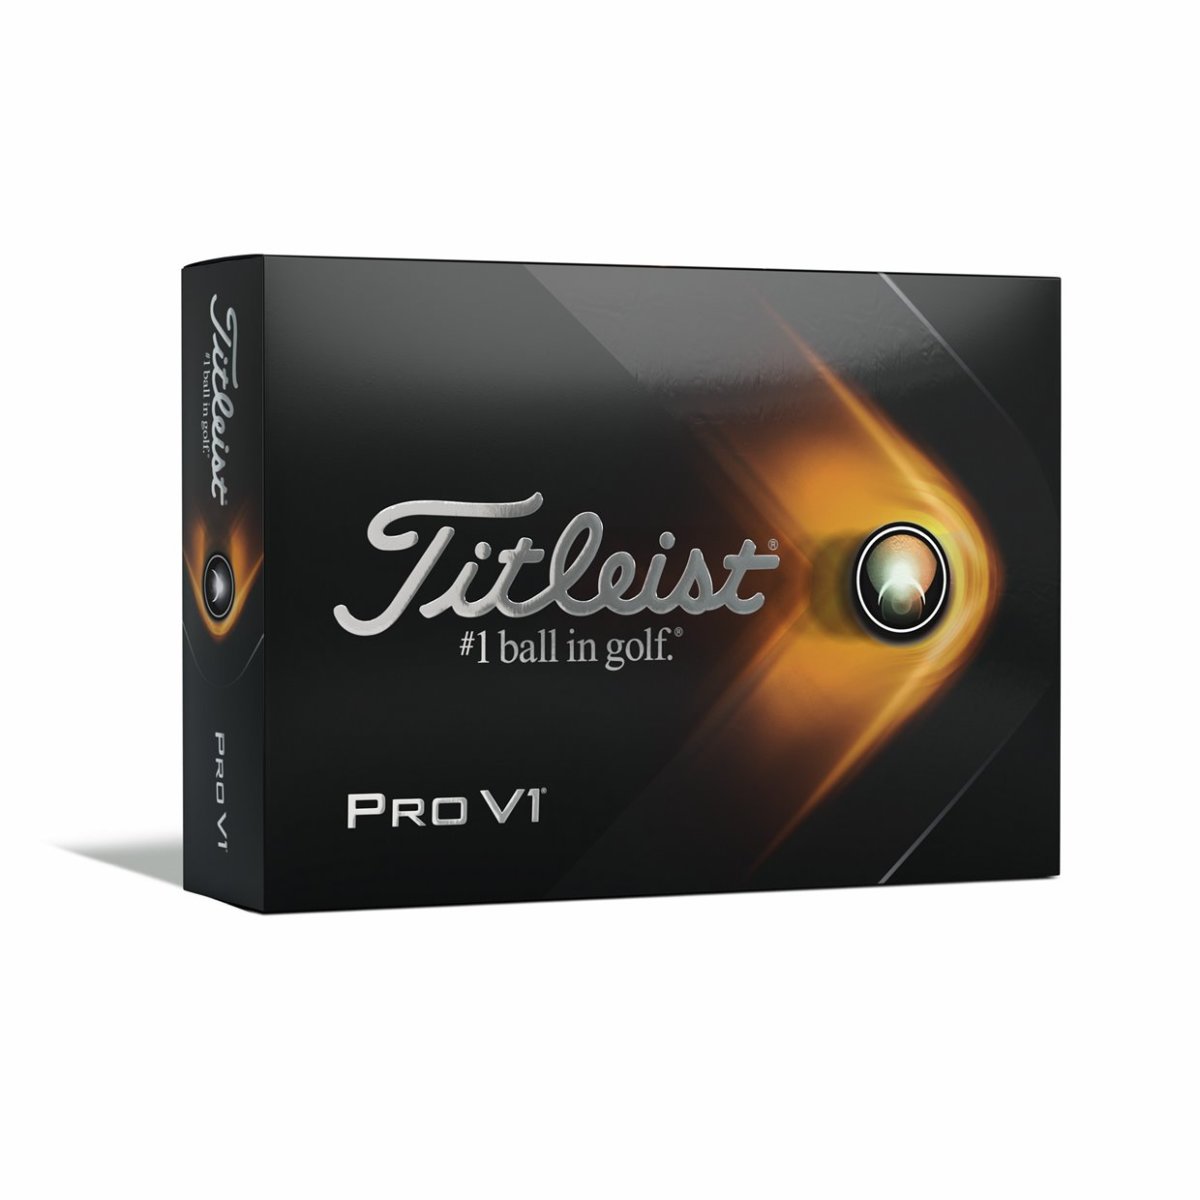 Shop the latest Titleist Pro V1 golf balls on Morning Read's online pro shop, powered by GlobalGolf